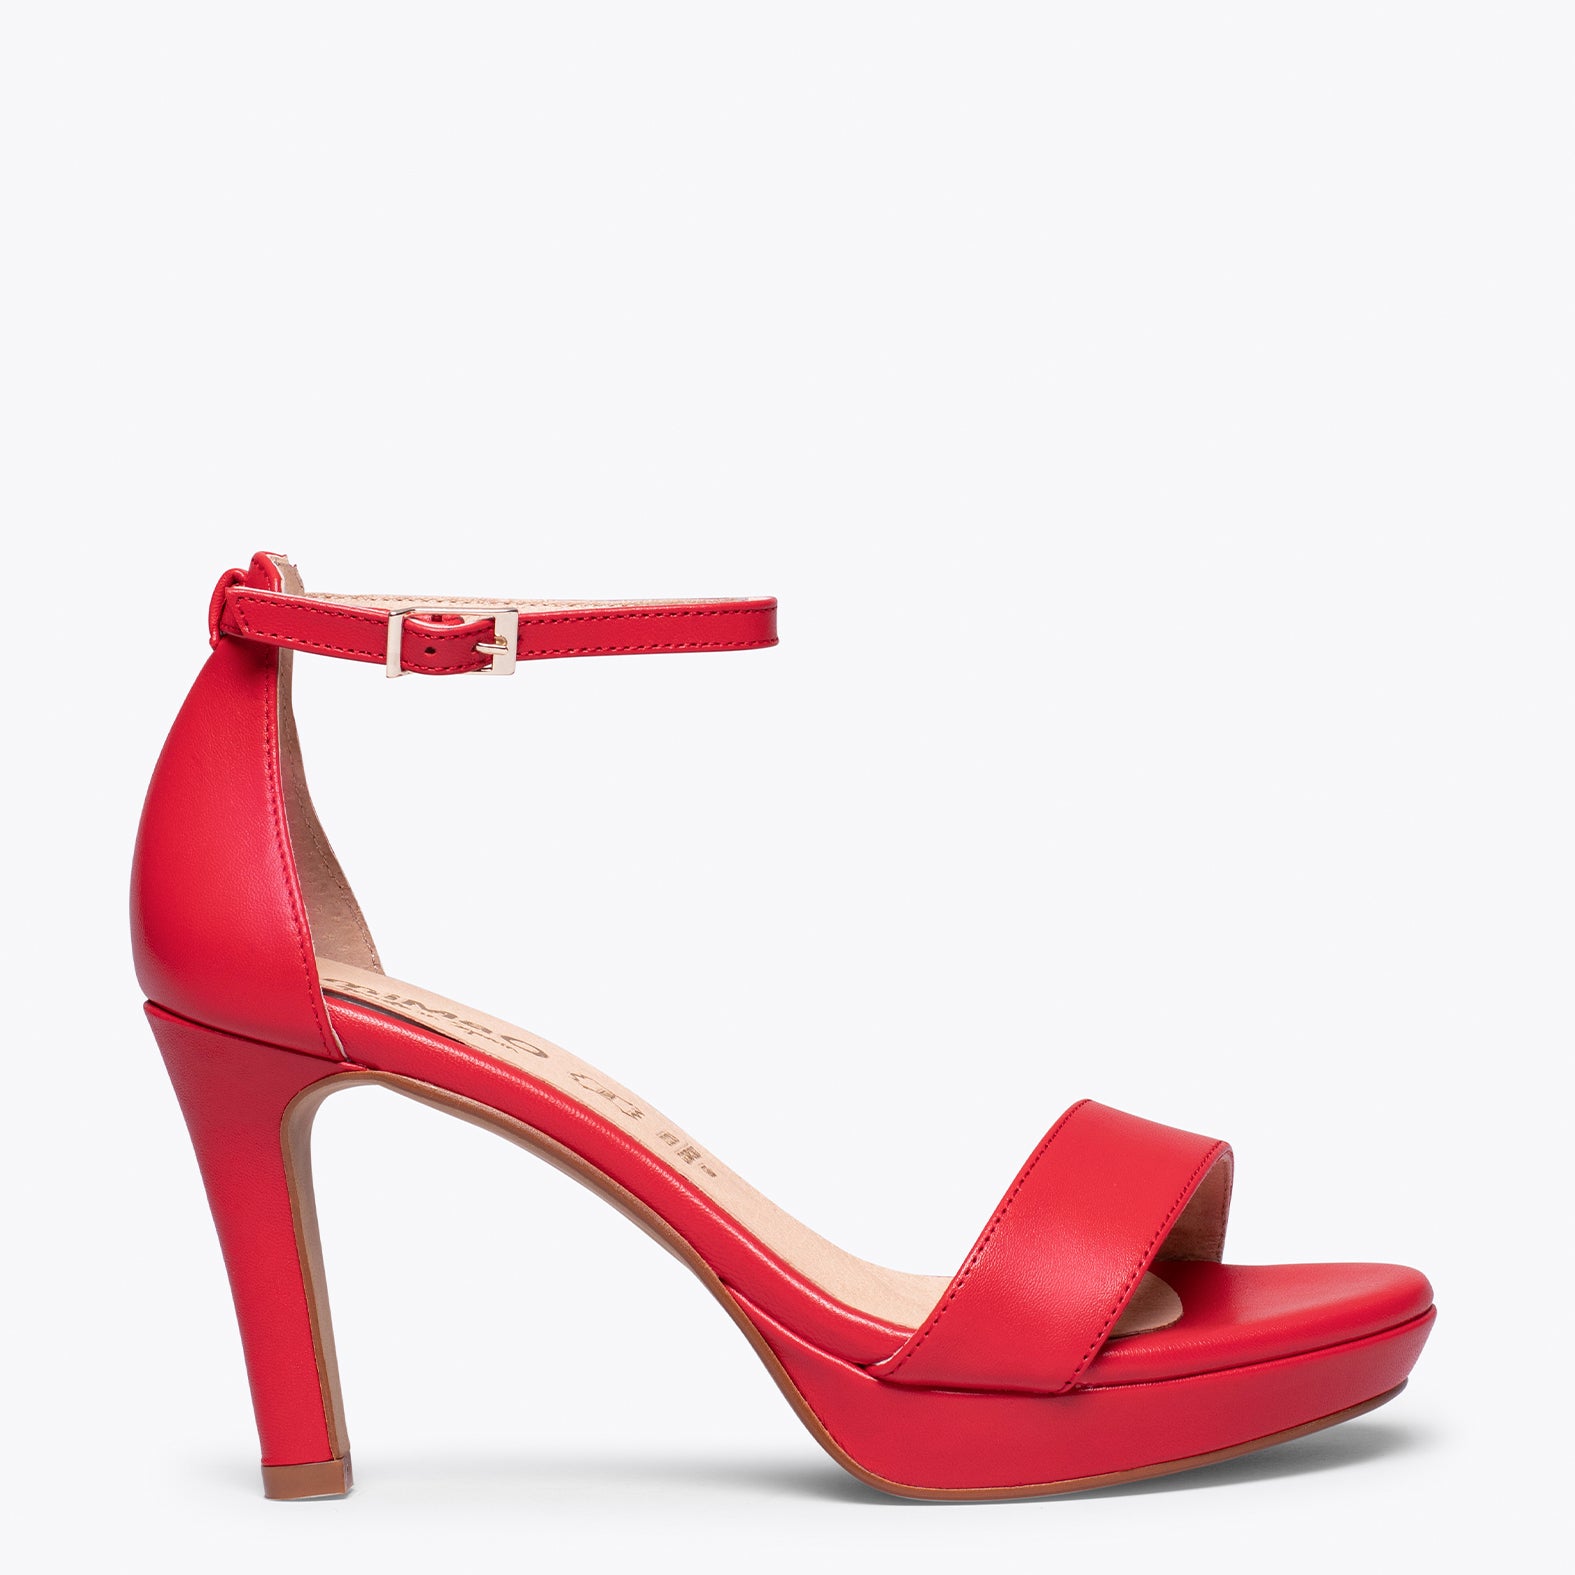 PARTY – RED high heel sandals with platform